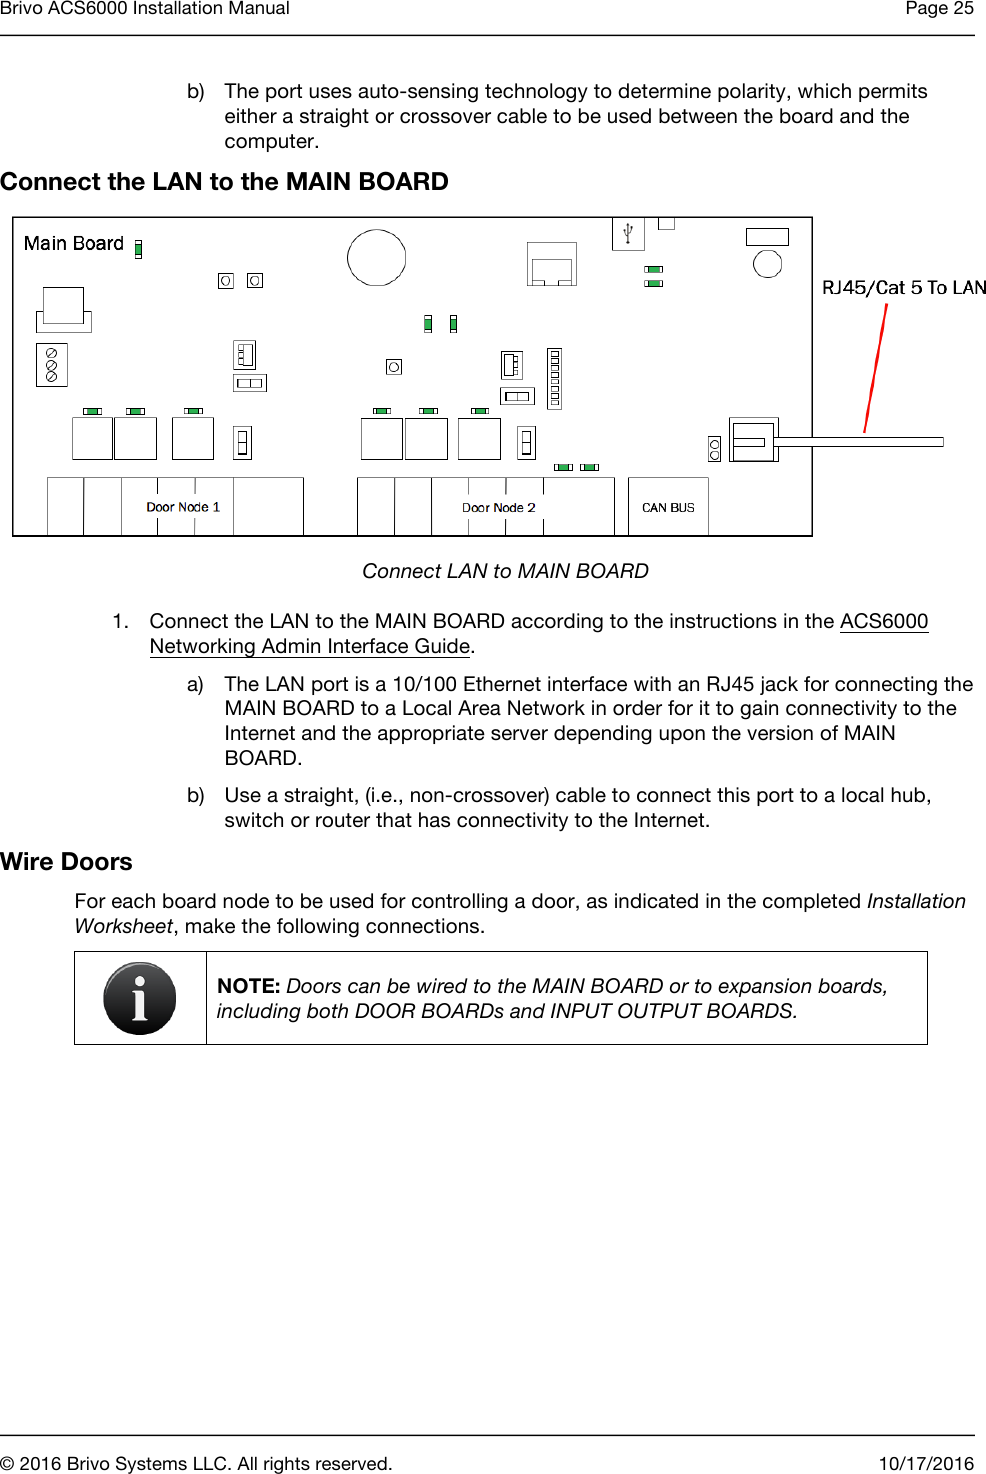 Brivo ACS6000 Installation Manual Page 25      © 2016 Brivo Systems LLC. All rights reserved. 10/17/2016  b) The port uses auto-sensing technology to determine polarity, which permits either a straight or crossover cable to be used between the board and the computer.  Connect the LAN to the MAIN BOARD   Connect LAN to MAIN BOARD 1. Connect the LAN to the MAIN BOARD according to the instructions in the ACS6000 Networking Admin Interface Guide. a) The LAN port is a 10/100 Ethernet interface with an RJ45 jack for connecting the MAIN BOARD to a Local Area Network in order for it to gain connectivity to the Internet and the appropriate server depending upon the version of MAIN BOARD. b) Use a straight, (i.e., non-crossover) cable to connect this port to a local hub, switch or router that has connectivity to the Internet. Wire Doors For each board node to be used for controlling a door, as indicated in the completed Installation Worksheet, make the following connections.  NOTE: Doors can be wired to the MAIN BOARD or to expansion boards, including both DOOR BOARDs and INPUT OUTPUT BOARDS.    